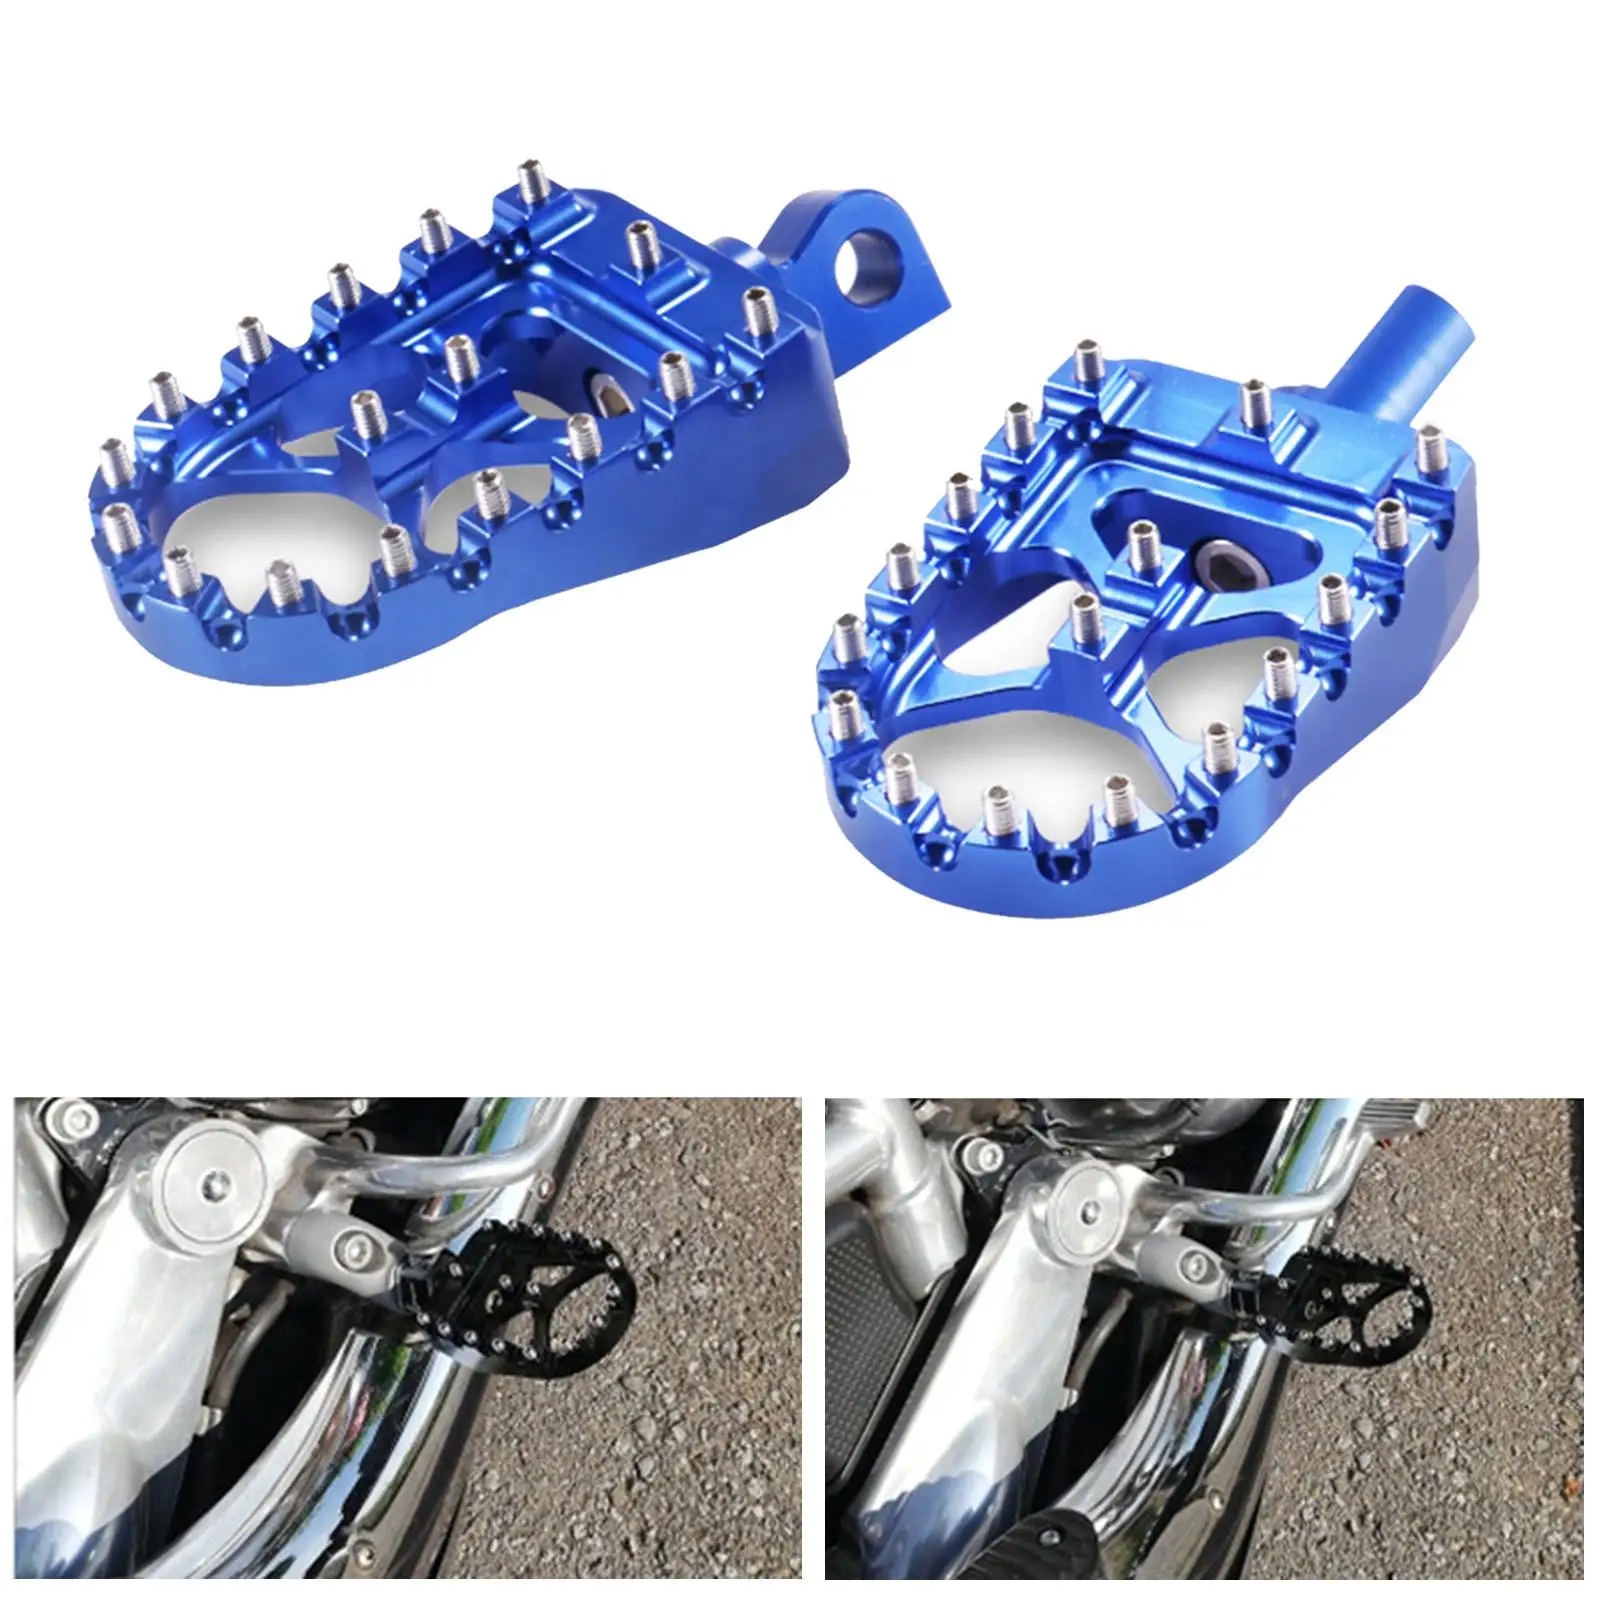 Anodized Aluminum Alloy Motorcycle Footrests Footpegs  XL883 XL883R 002010